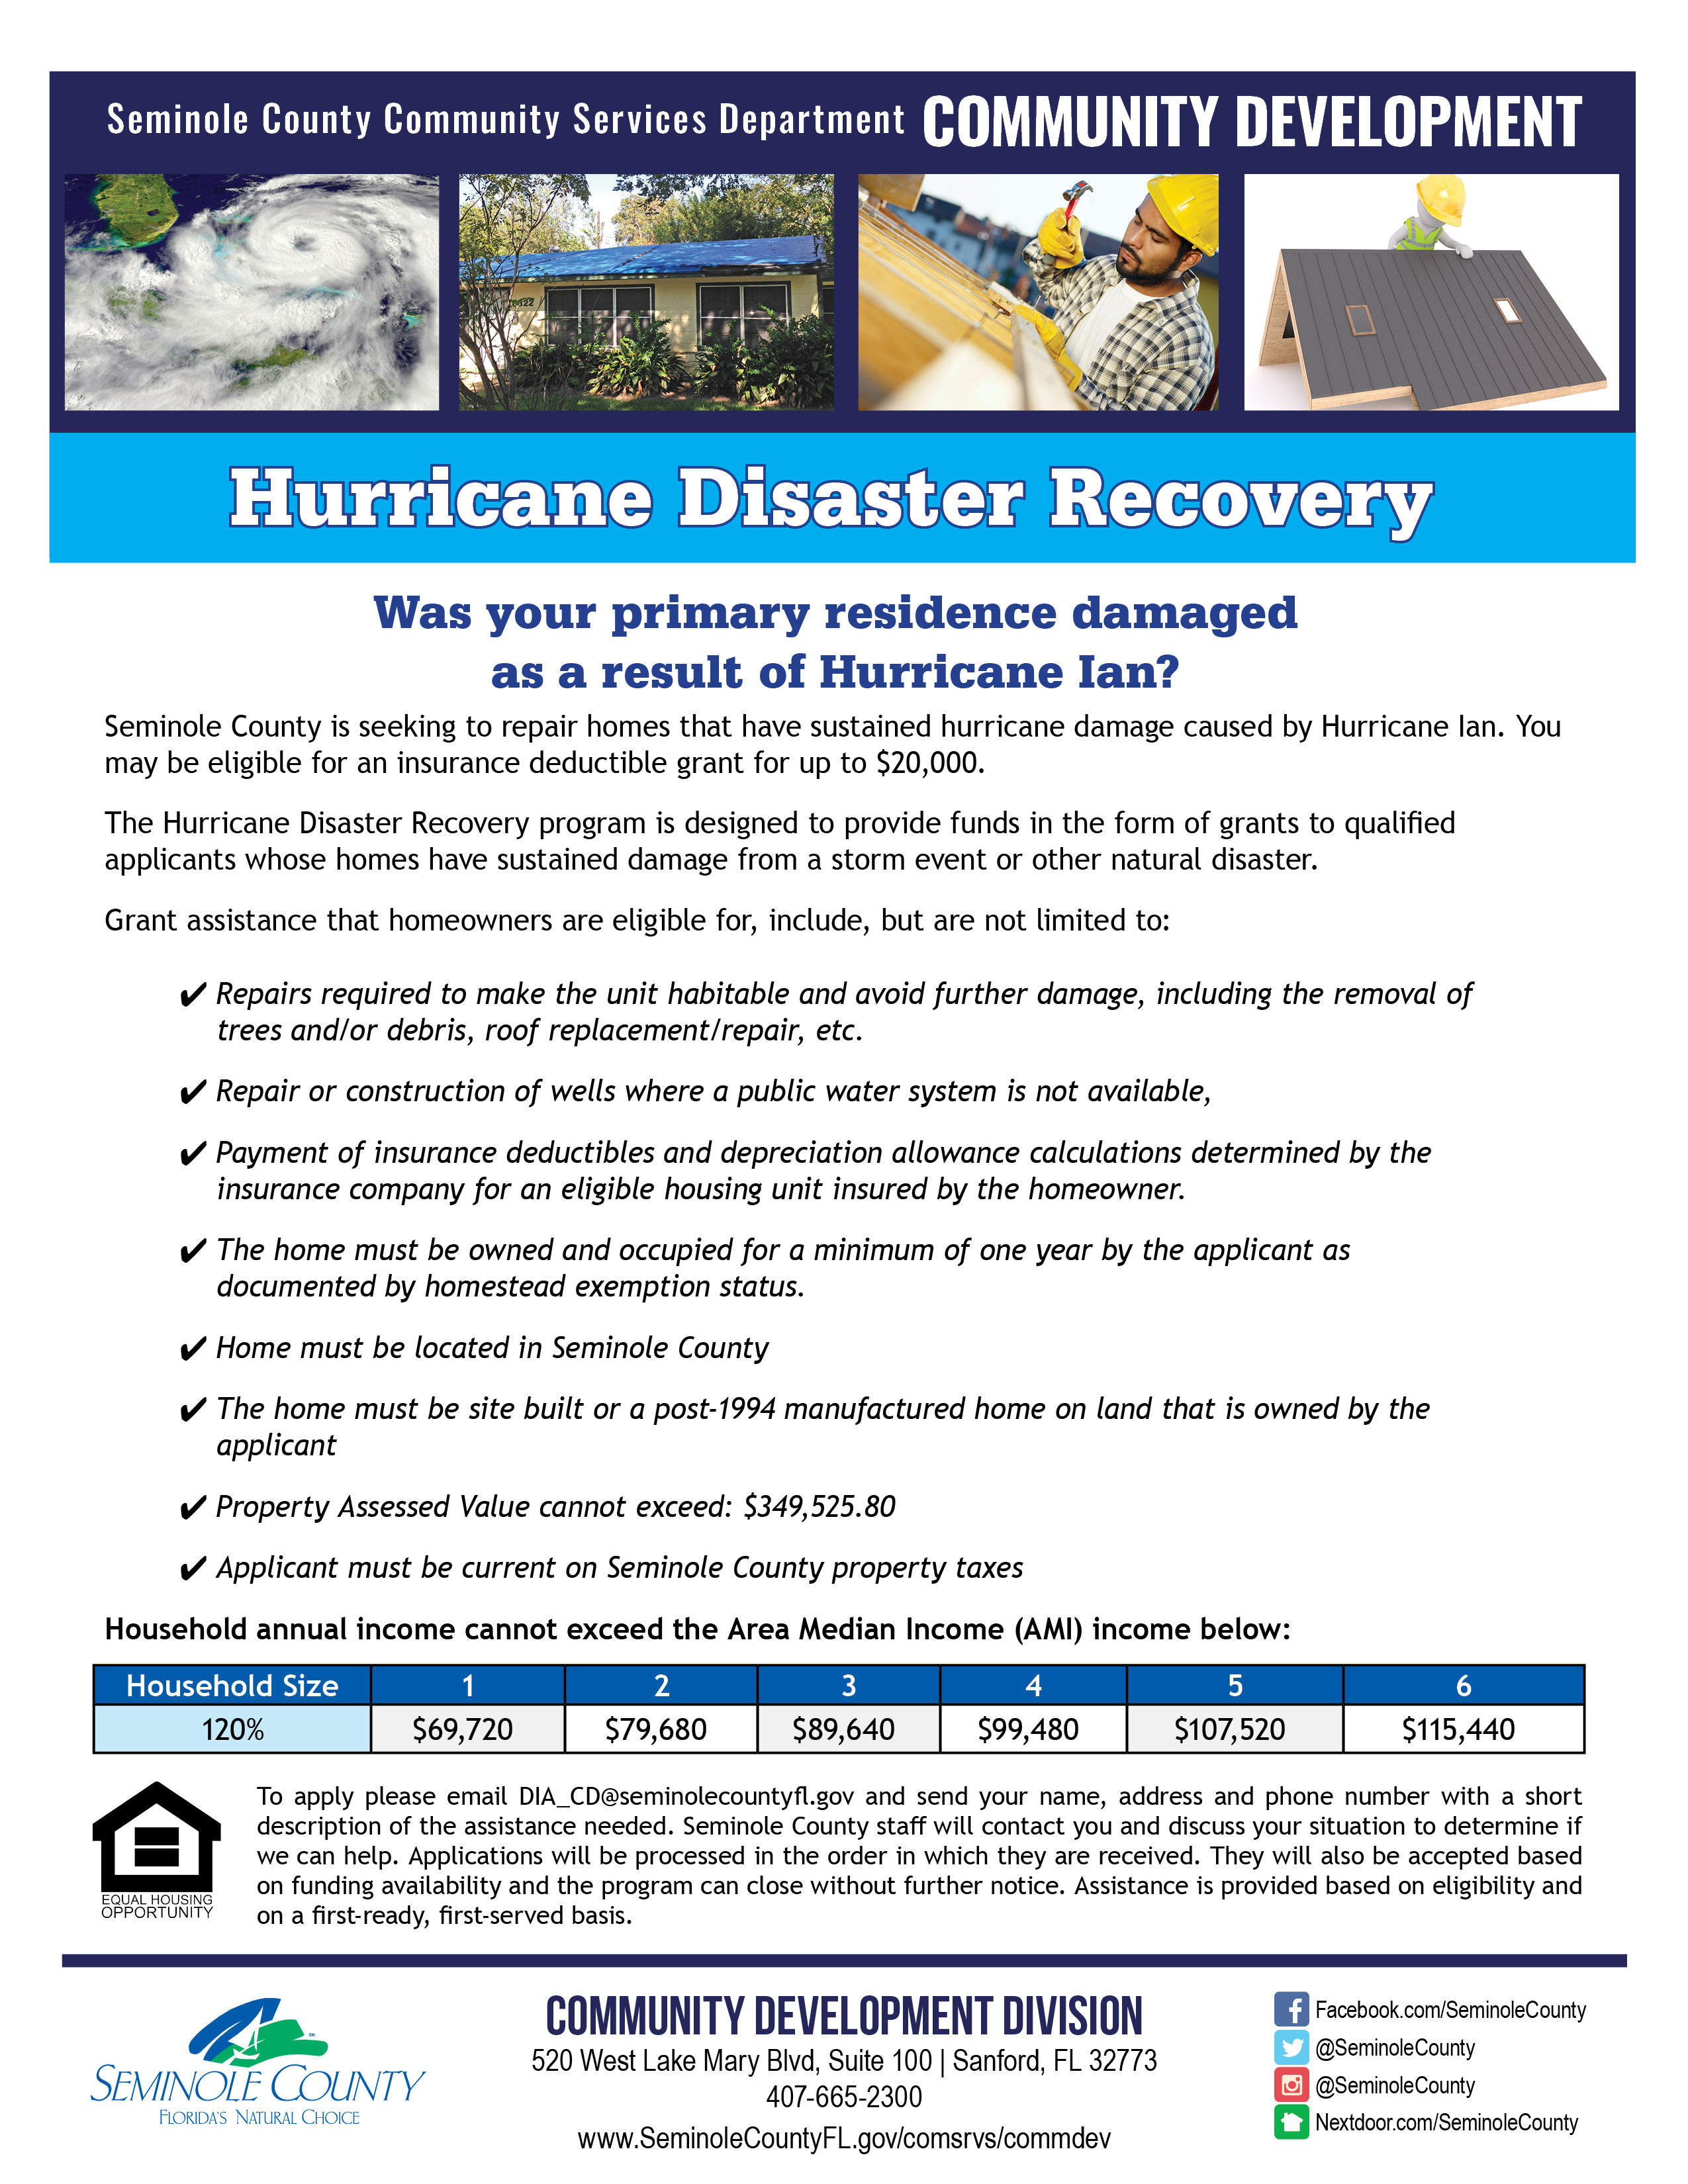 Disaster Recovery Assistance News Image